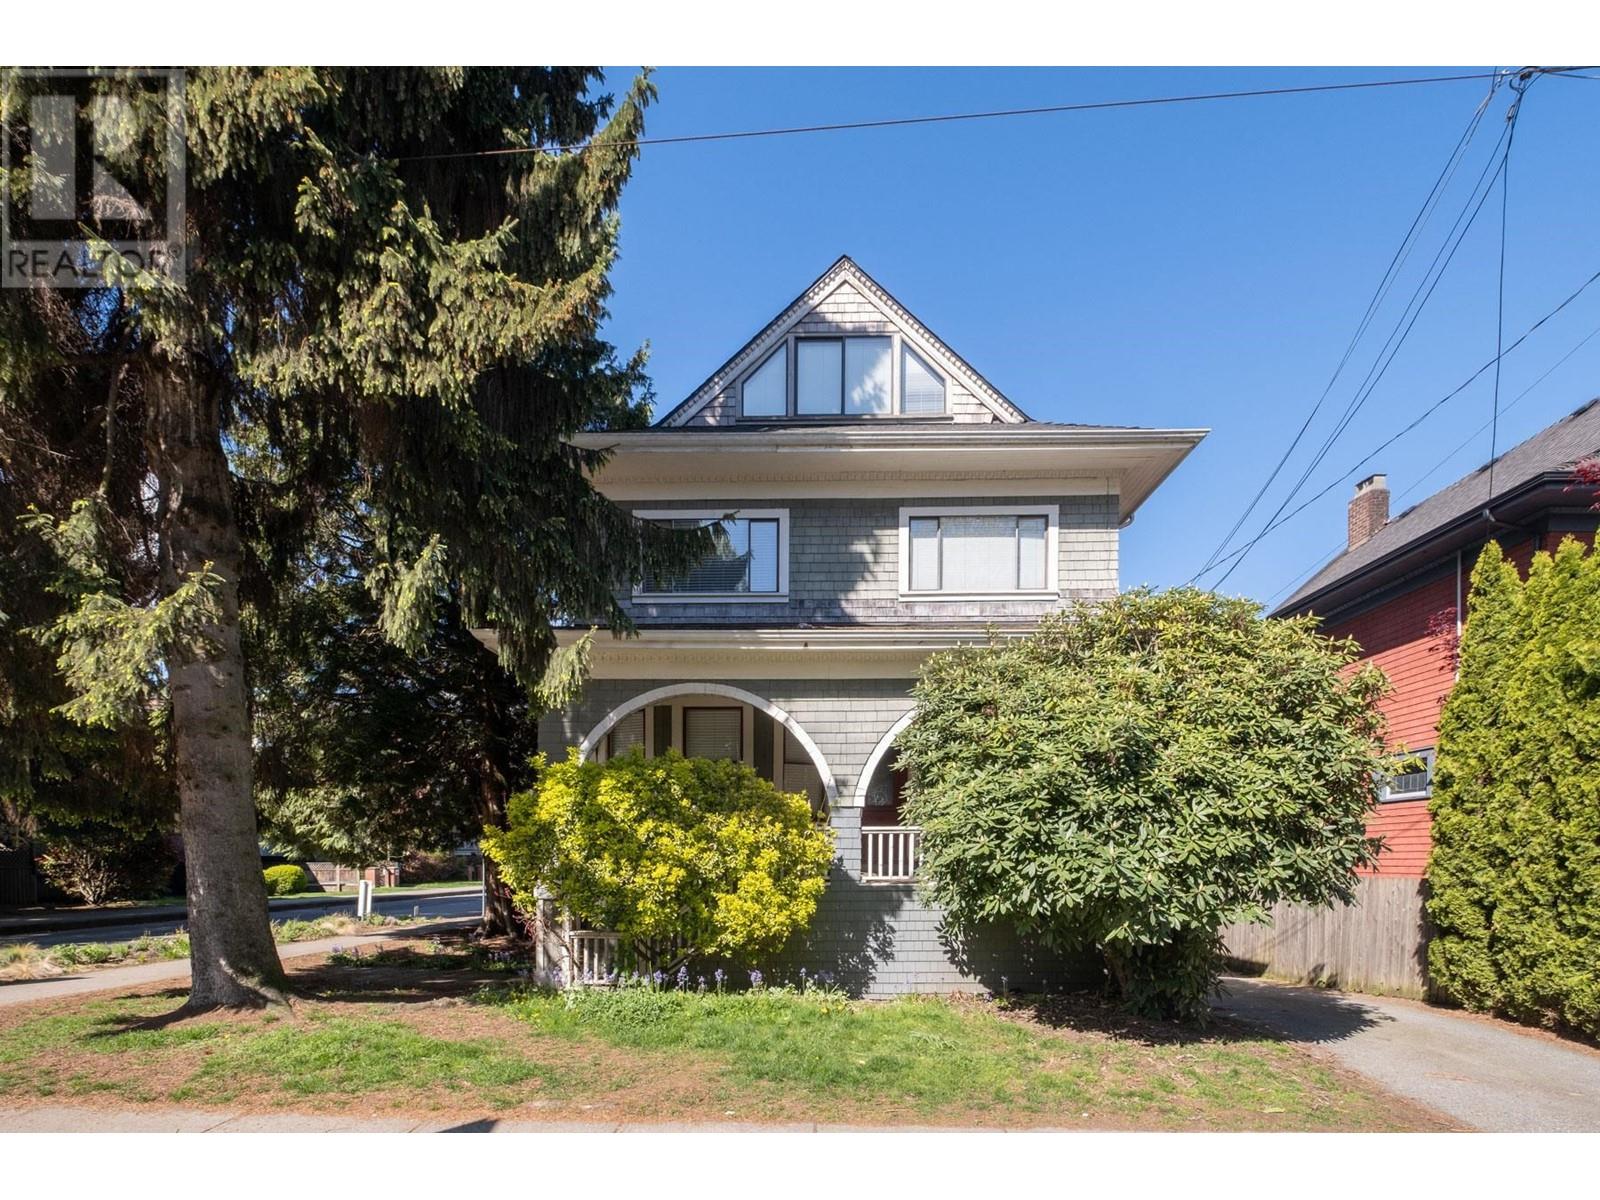 Listing Picture 29 of 34 : 1549 MAPLE STREET, Vancouver / 溫哥華 - 魯藝地產 Yvonne Lu Group - MLS Medallion Club Member